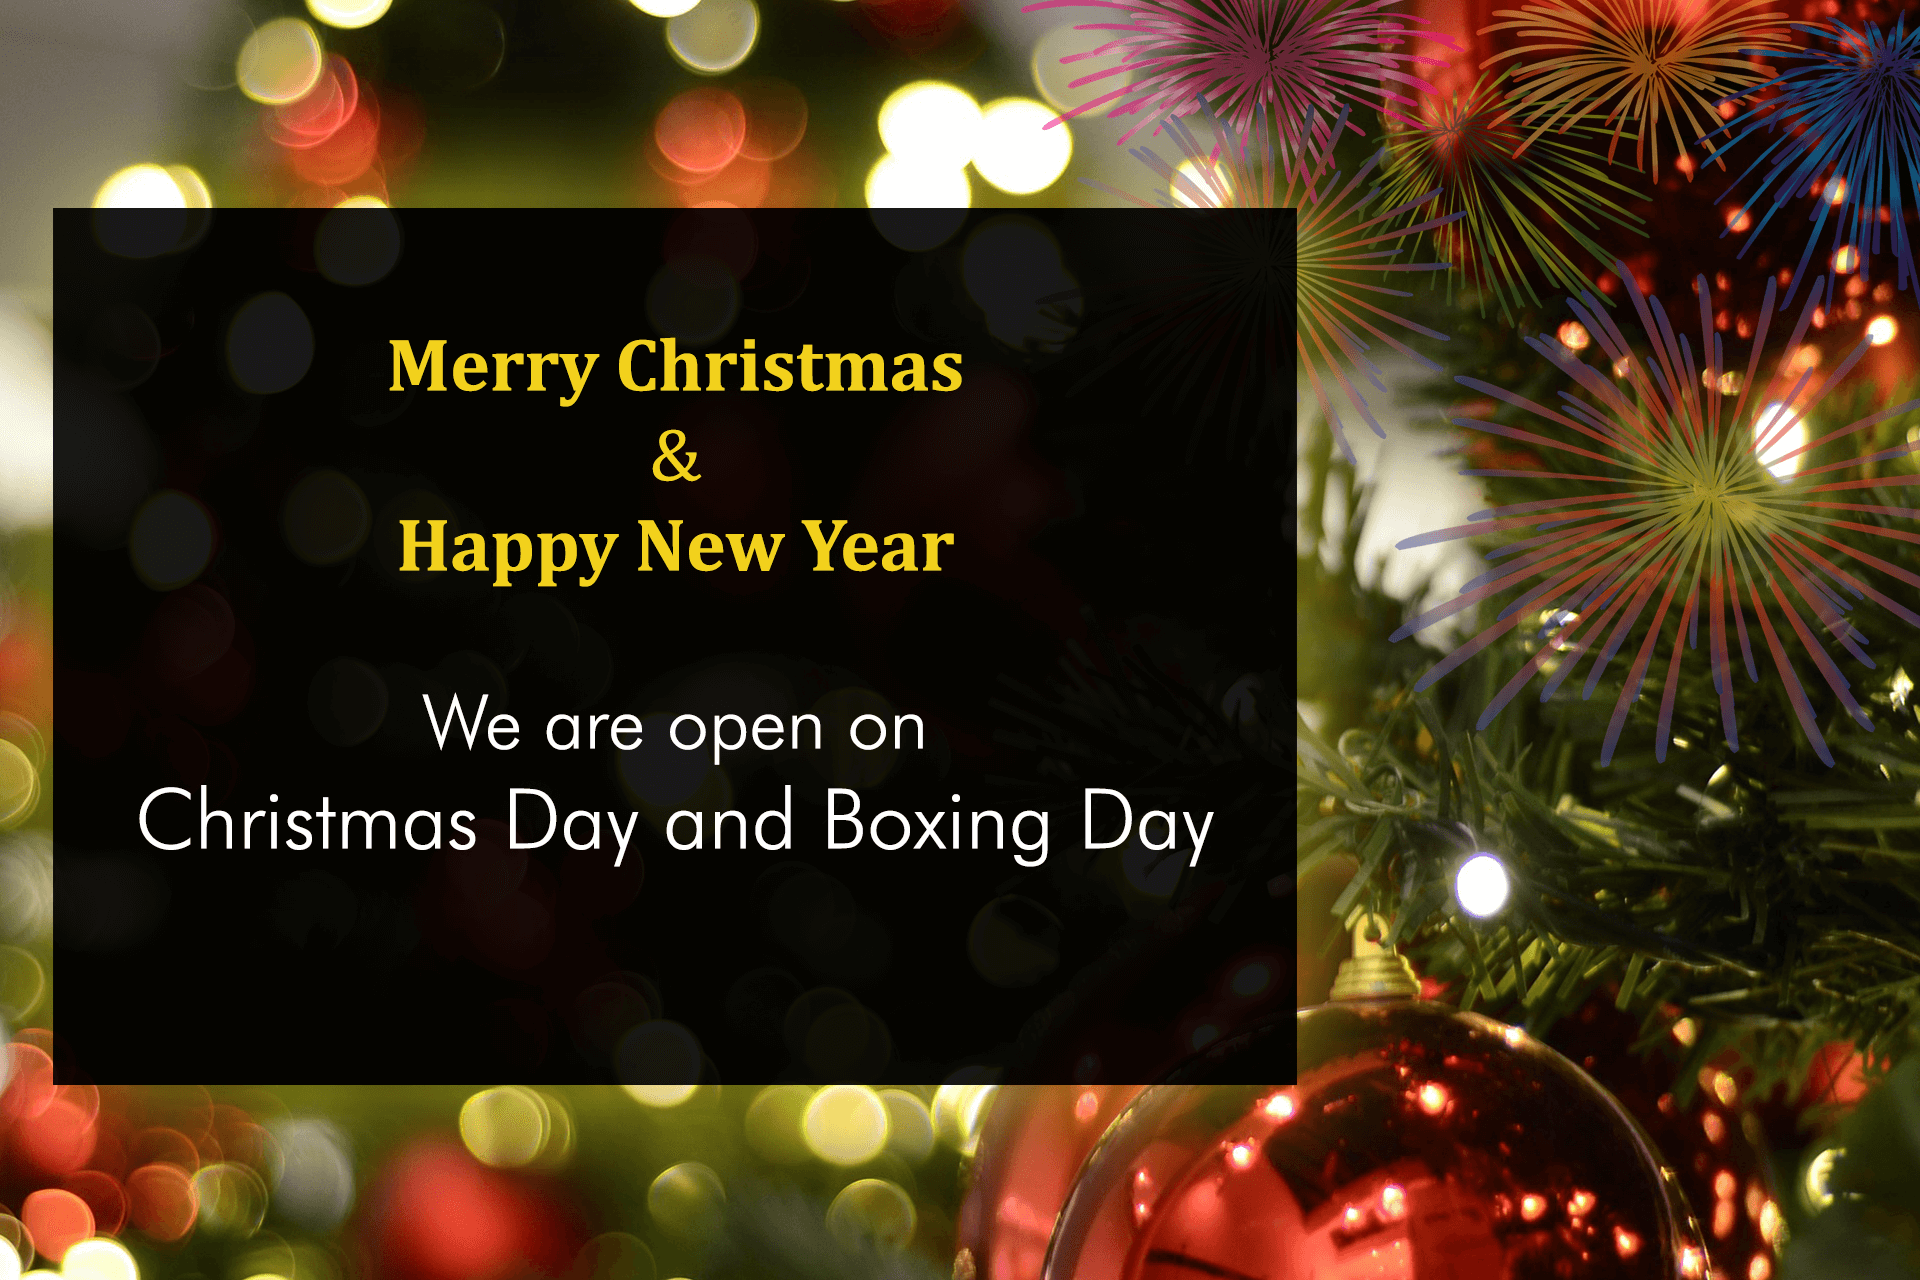 We are open on Christmas and Boxing Day